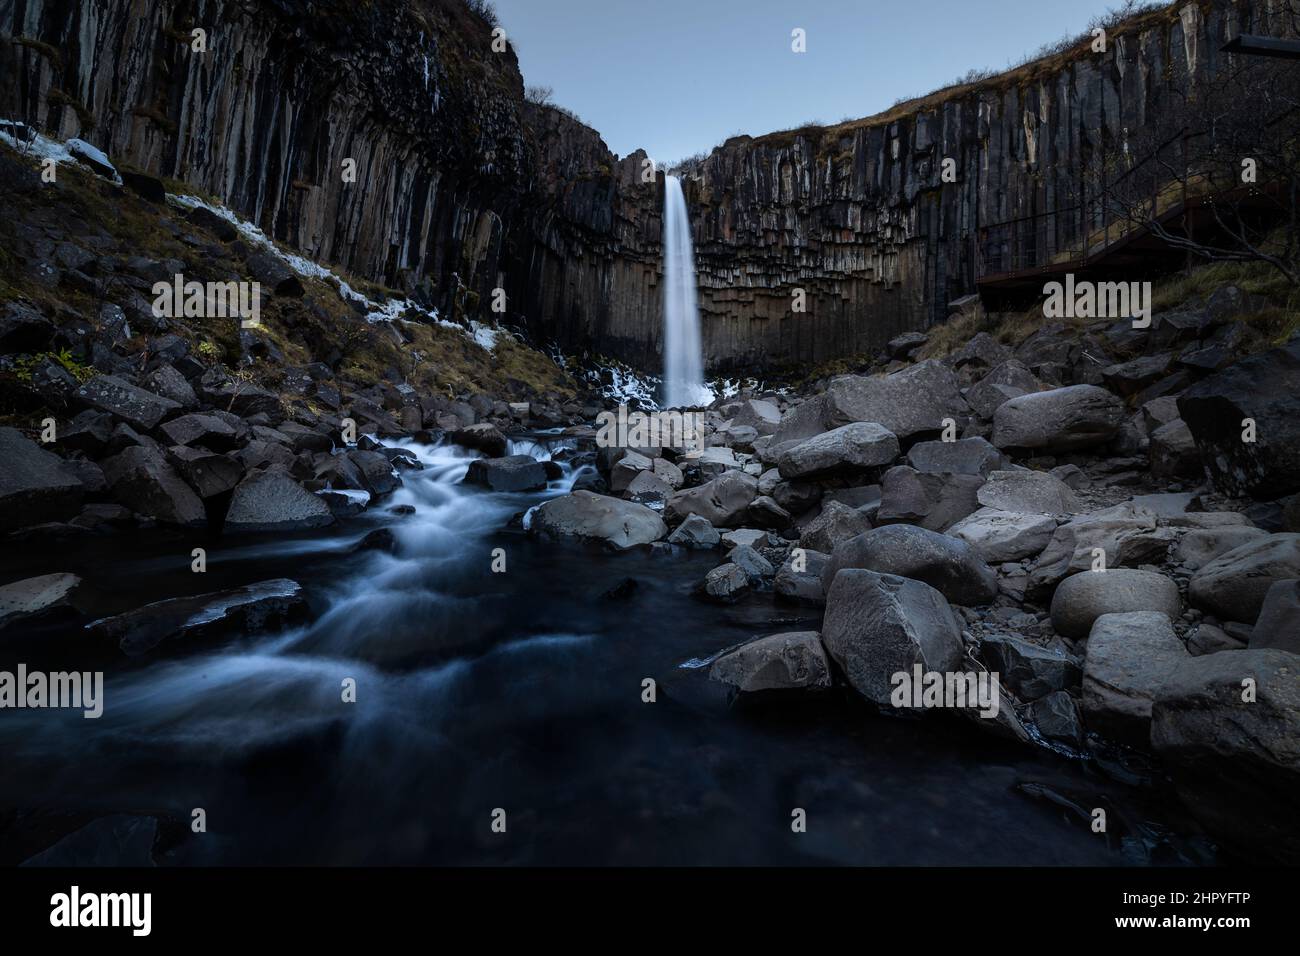 View of the Svartifoss waterfall in the Skaftafell National Park, Iceland Stock Photo